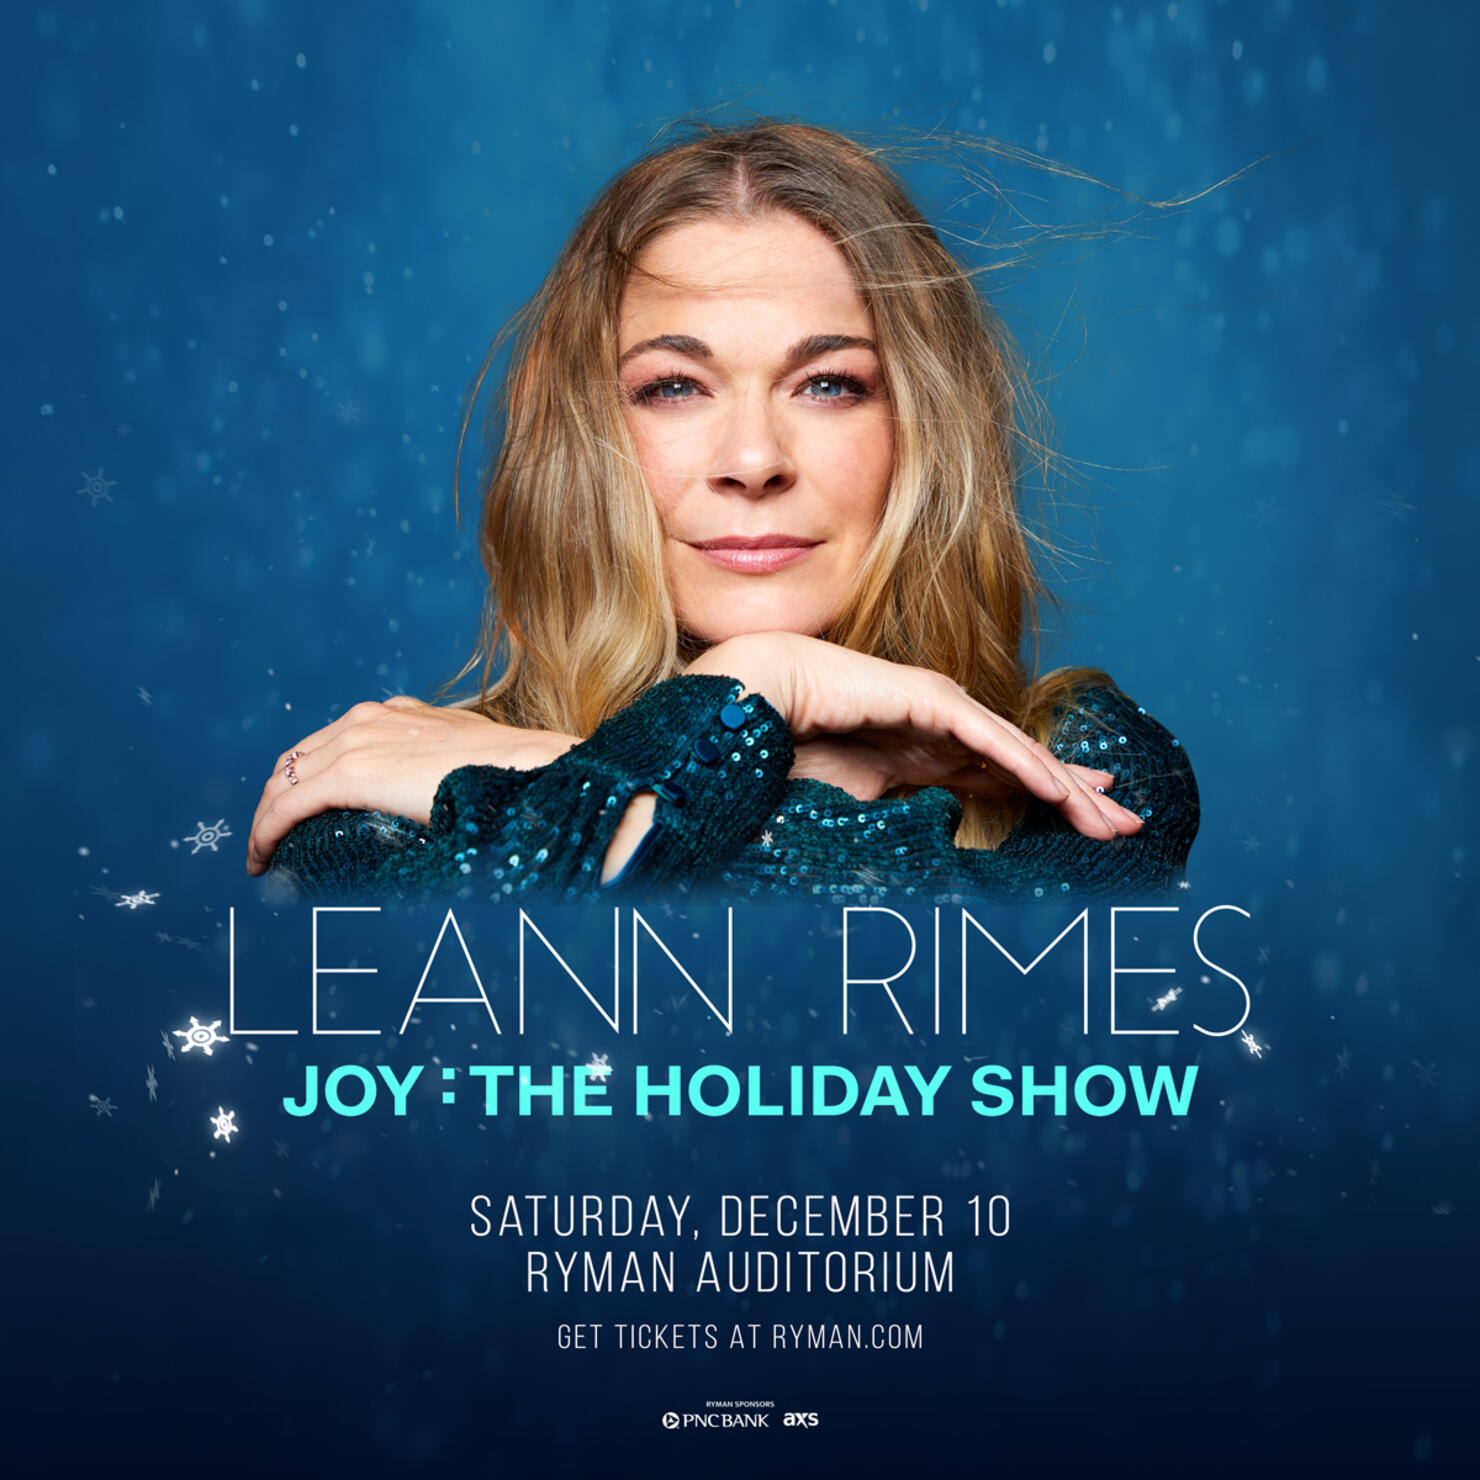 LeAnn Rimes To Perform Holiday Show At Ryman Auditorium In Nashville |  iHeart